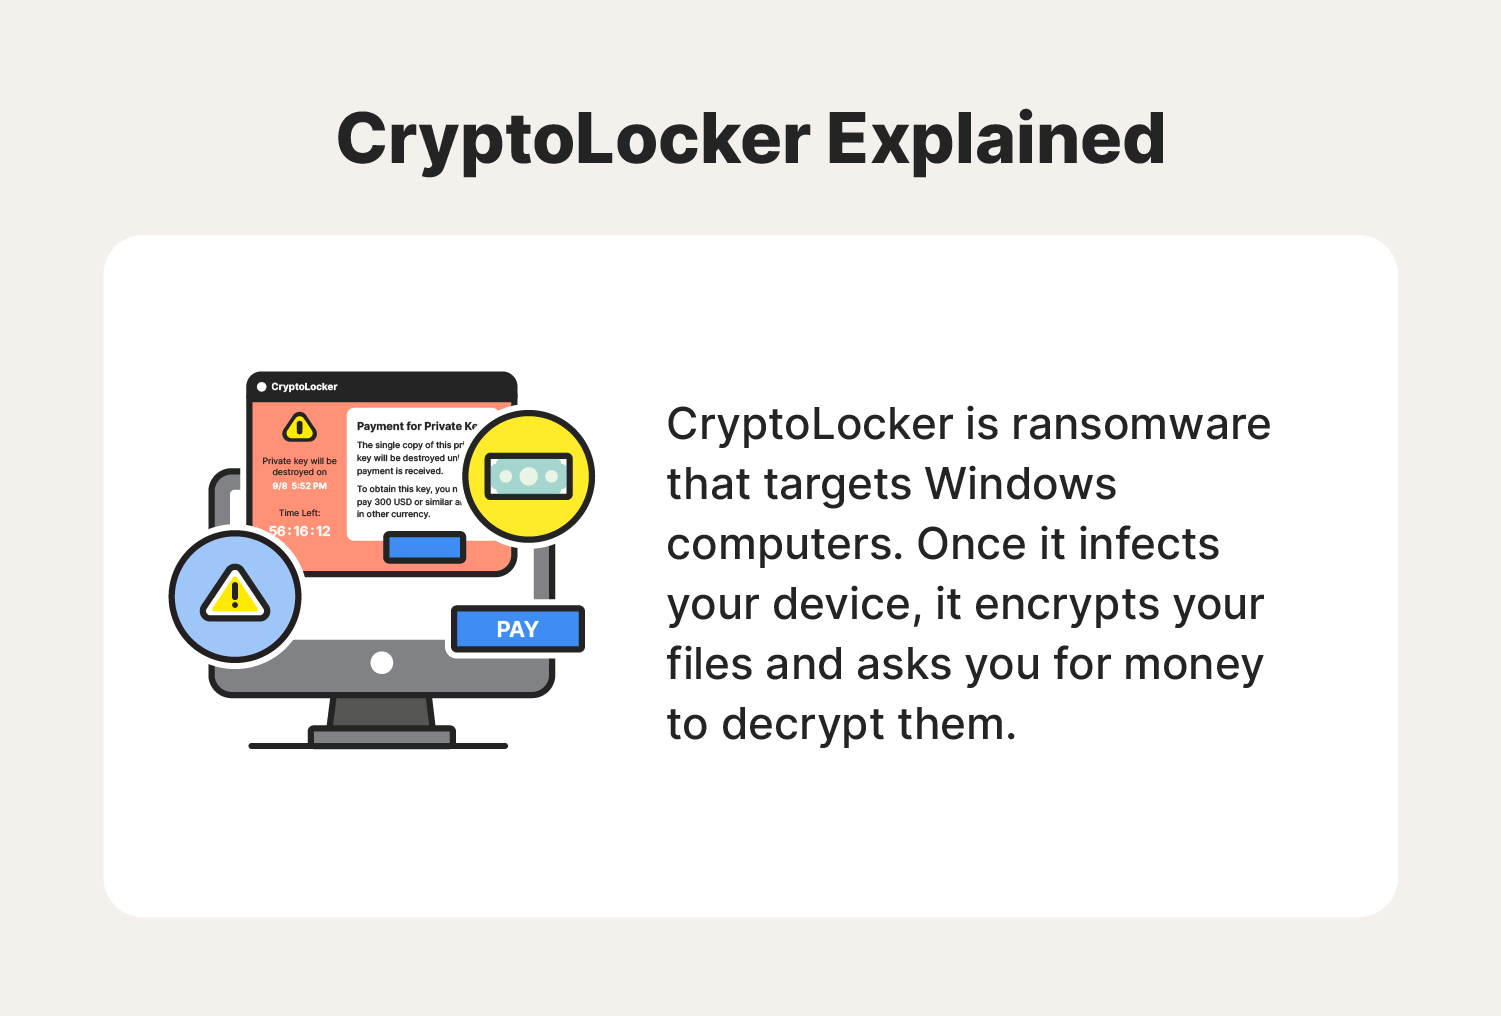 A graphic explains what CryptoLocker is and how it works.